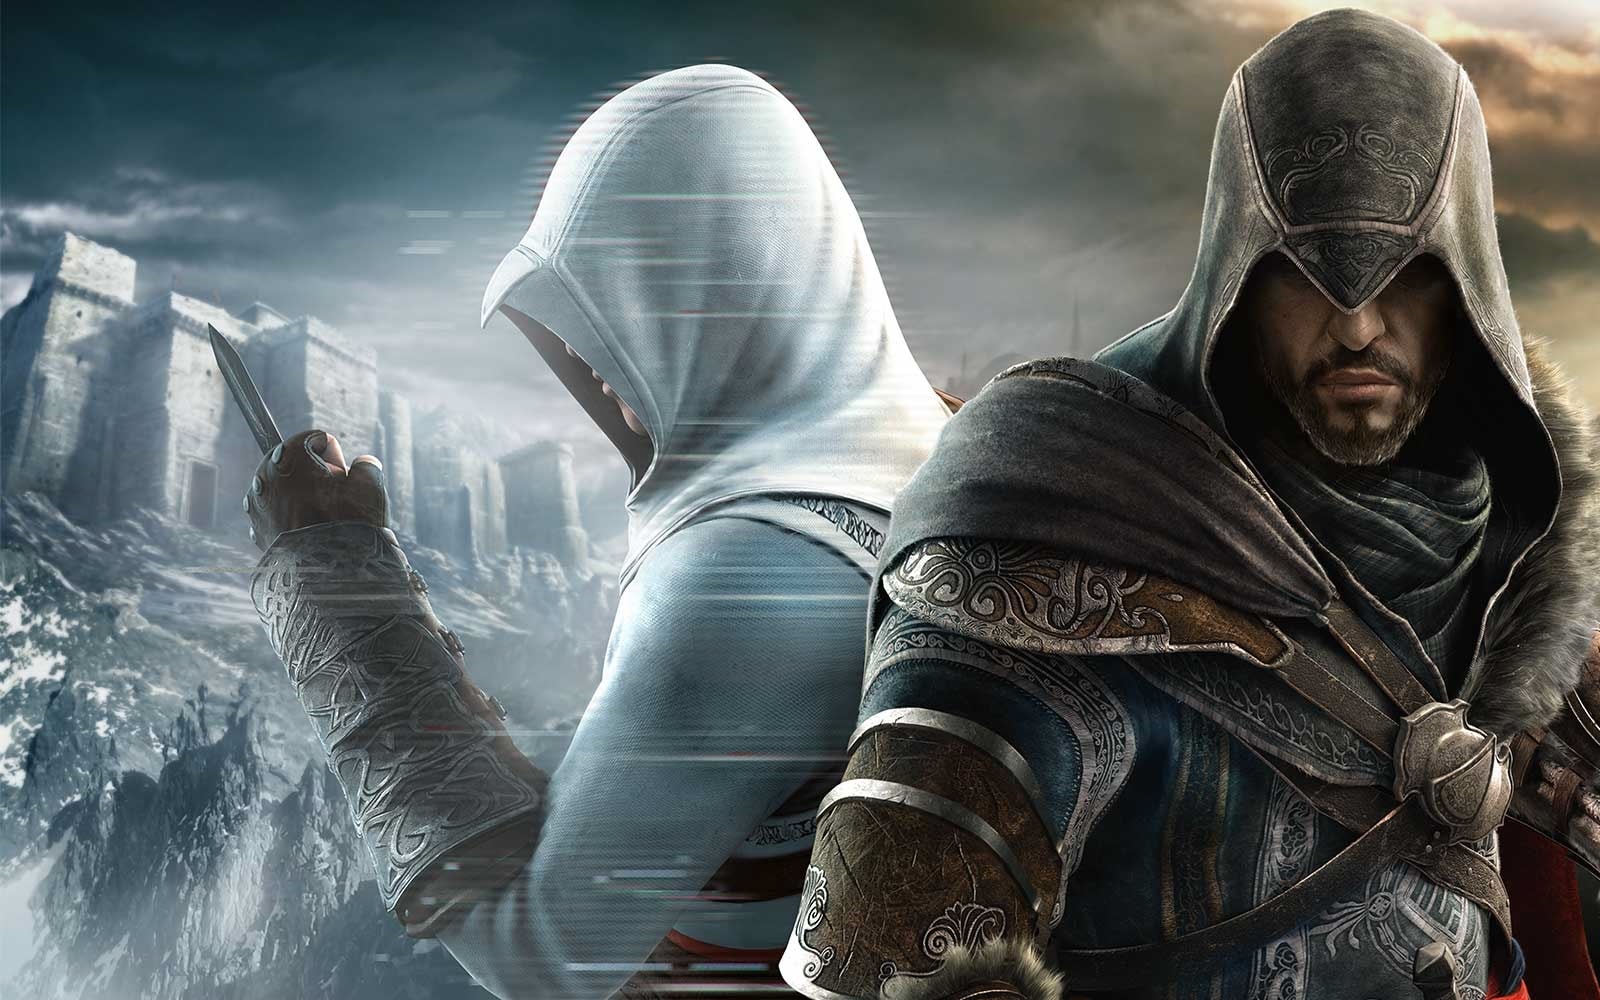 Assassin's Creed: Revelations - Game Overview